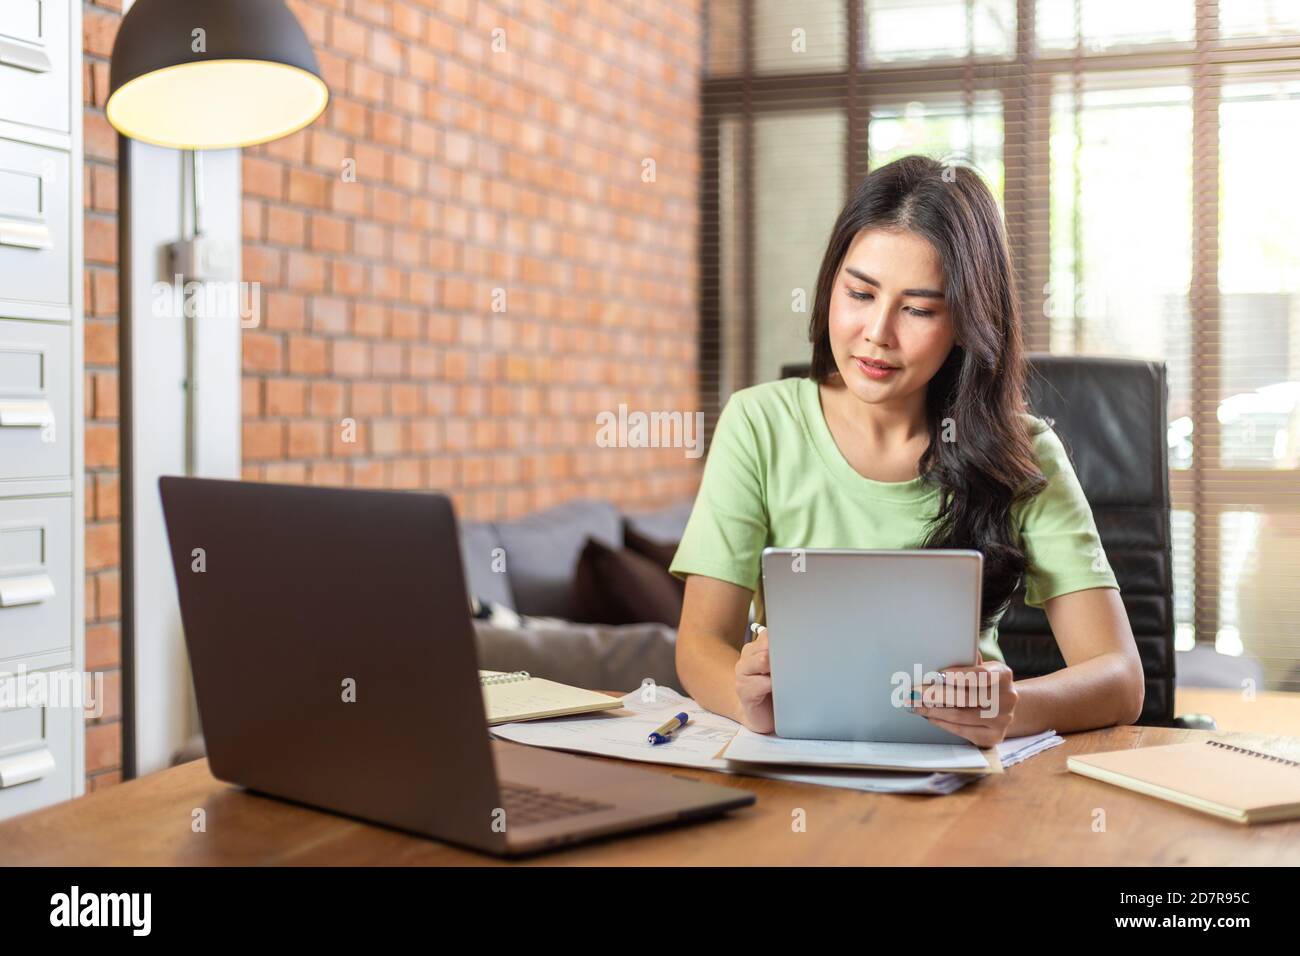 Young beautiful Asian business woman using a computer tablet while working from her home office during COVID pandamic lockdown Stock Photo